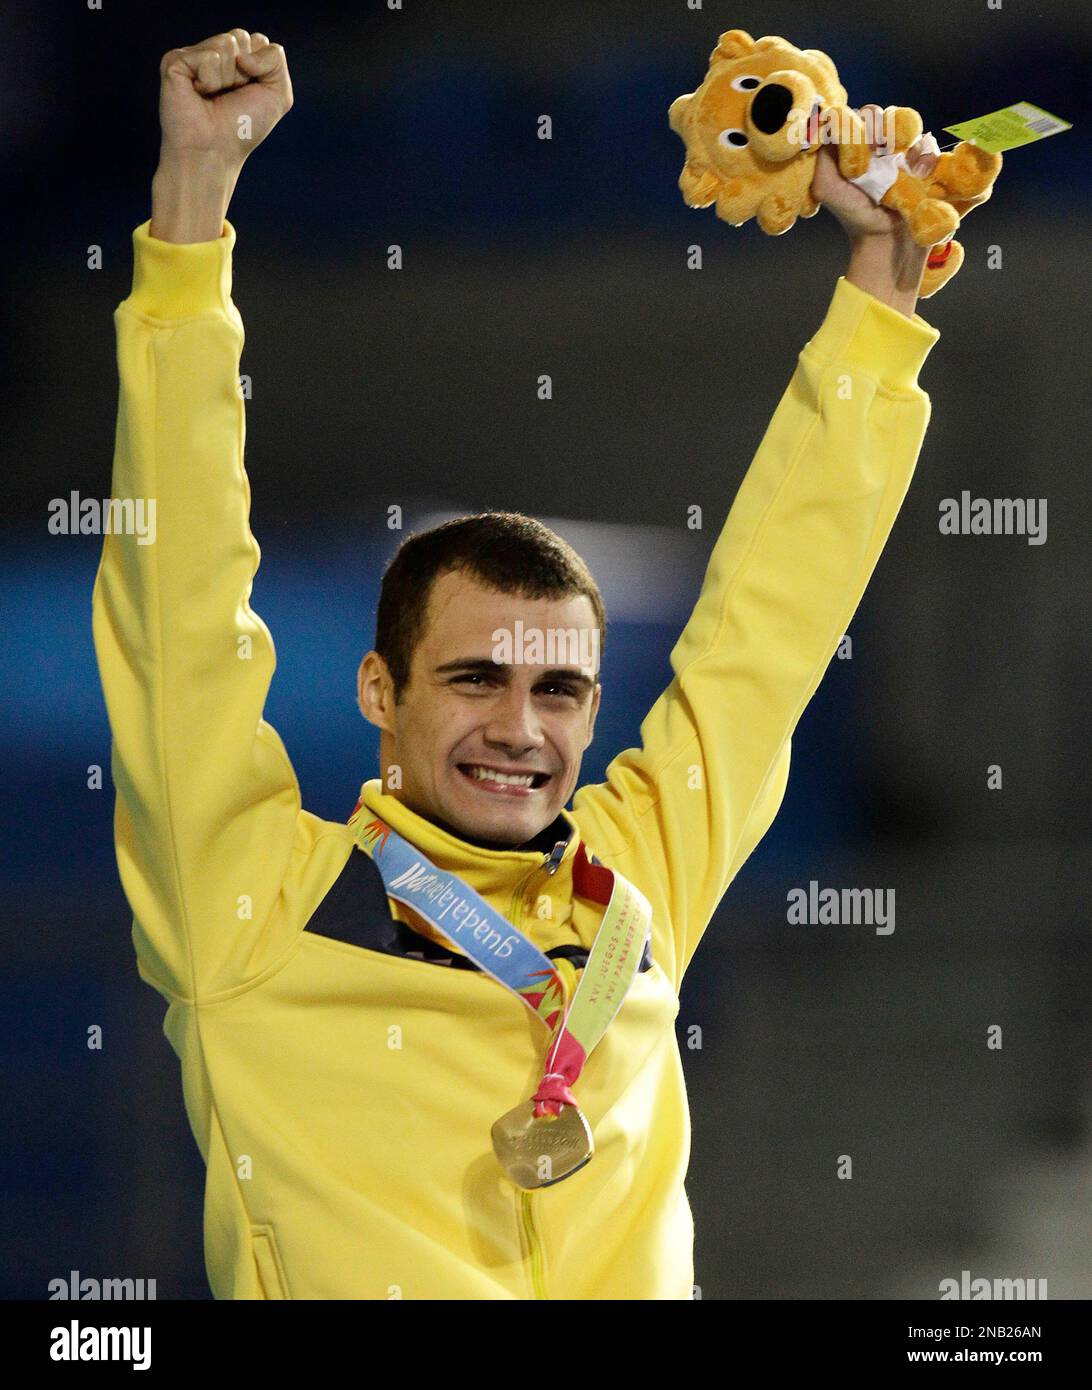 Brazil's Leonardo De Deus reacts after being awarded the gold medal for winning the men's 200m butterfly at the Pan American Games in Guadalajara, Mexico, Monday, Oct. 17, 2011. De Deus was initially disqualified, because of the sponsor’s logo on his swim cap according to Brazilian officials , and then reinstated as the gold medalist after an appeal. (AP Photo/Julie Jacobson) Banque D'Images